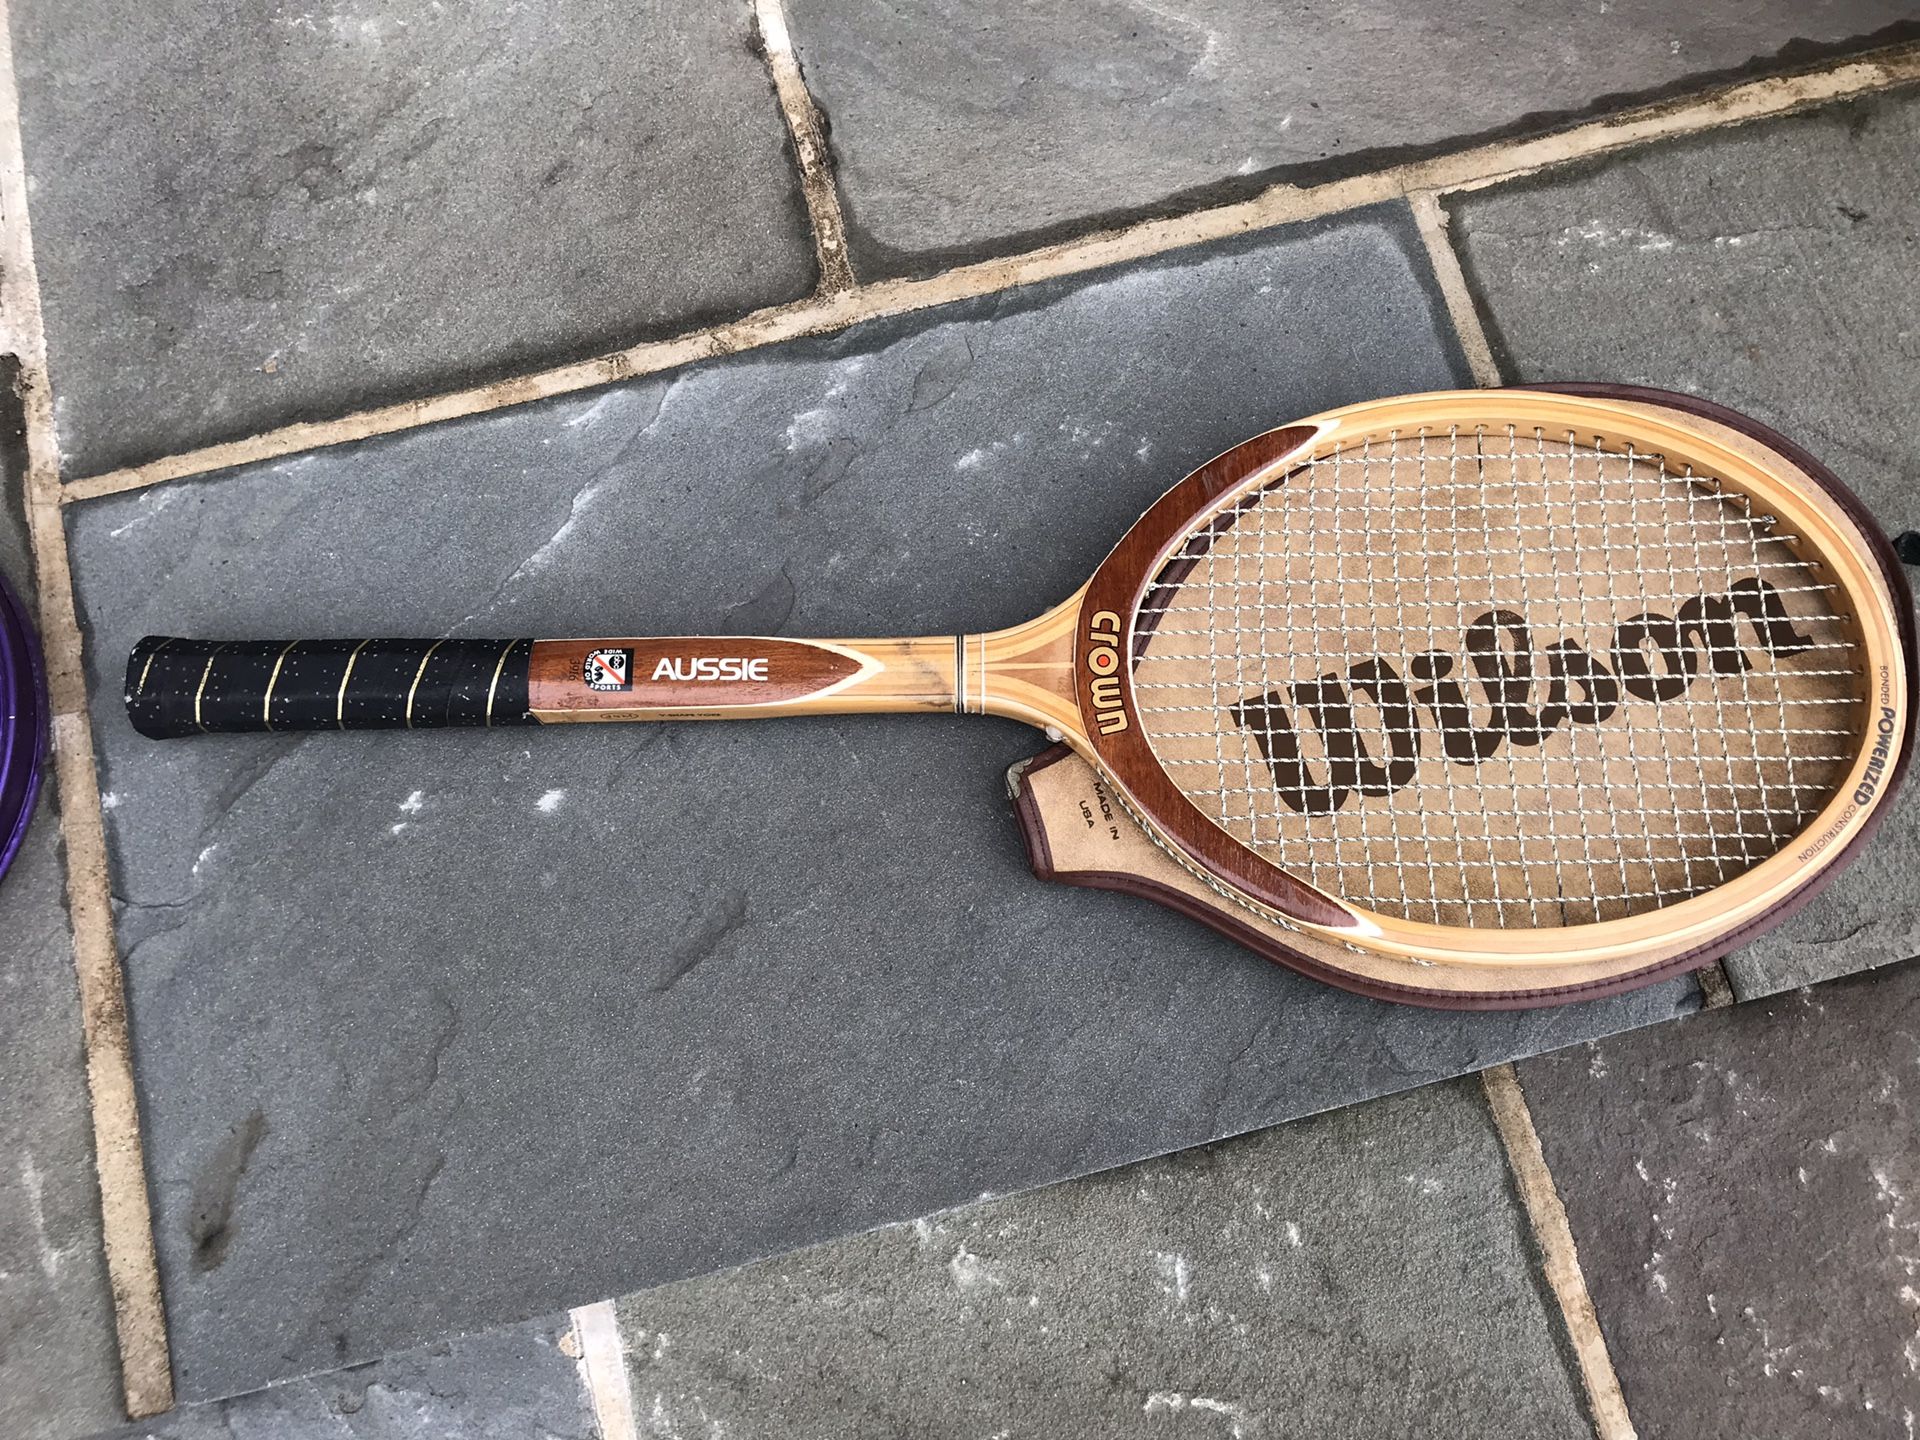 Wilson and Spalding Tennis Rackets (New)